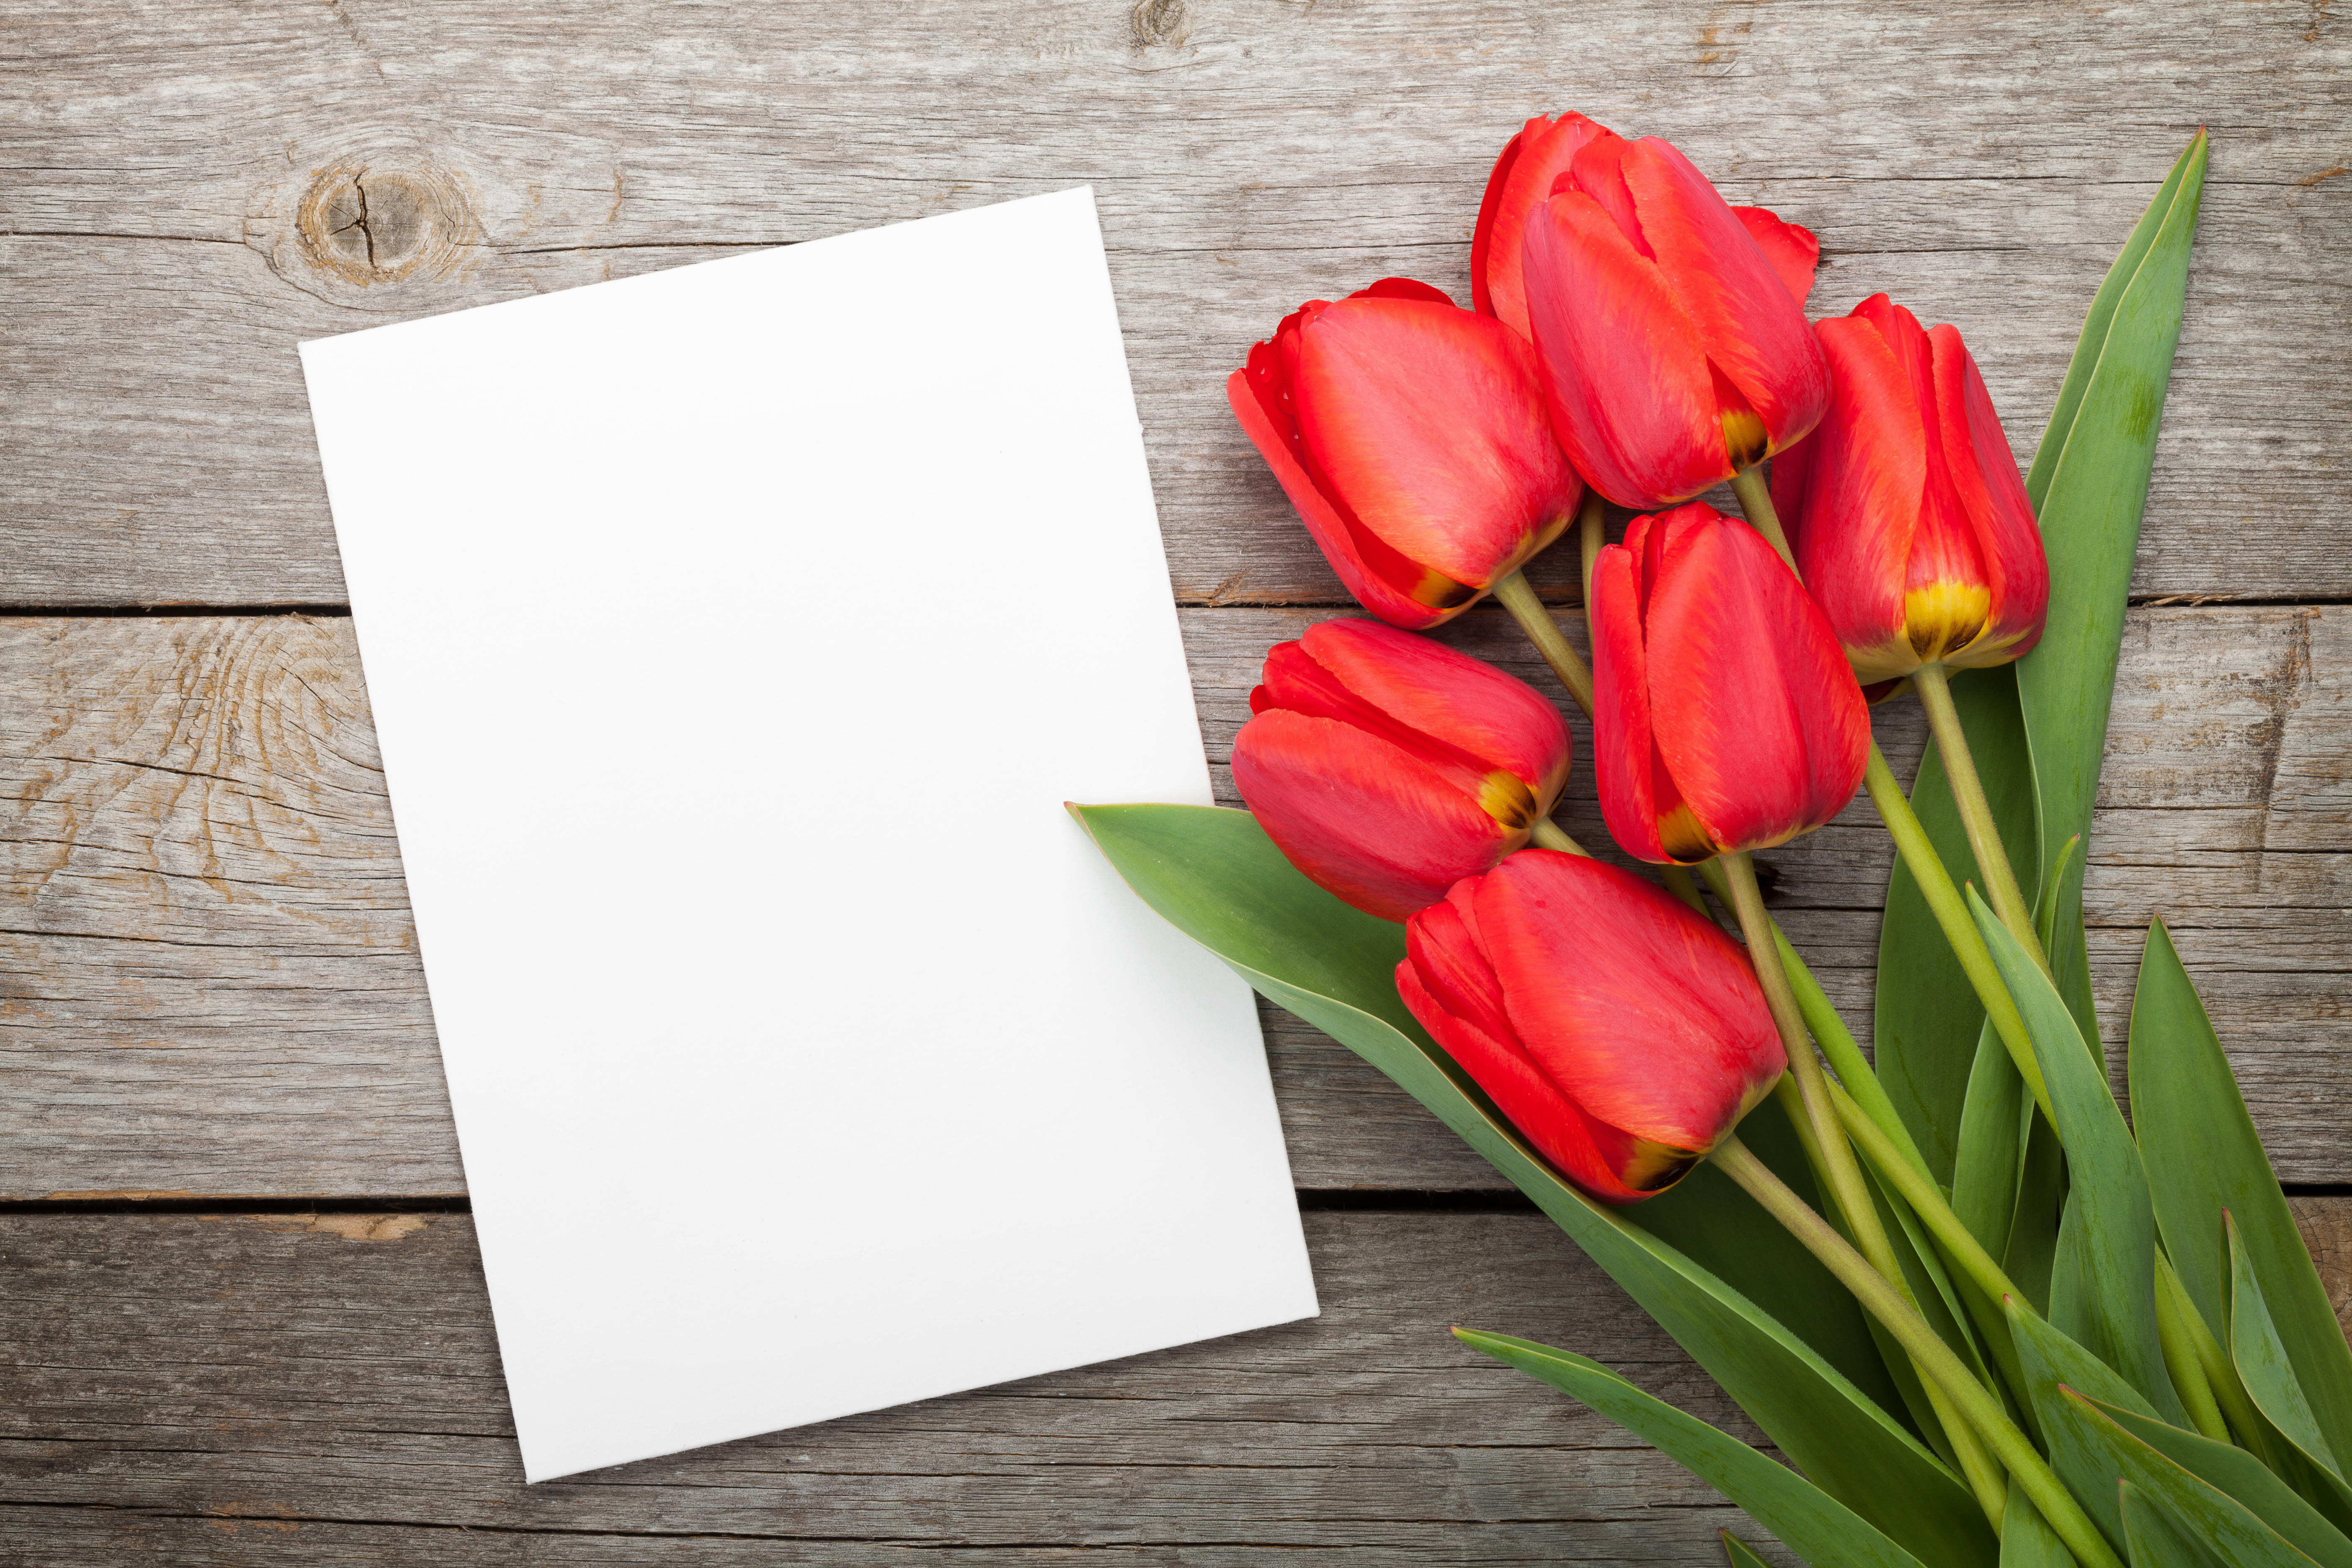 Free photo A bouquet of red tulips with a white leaf